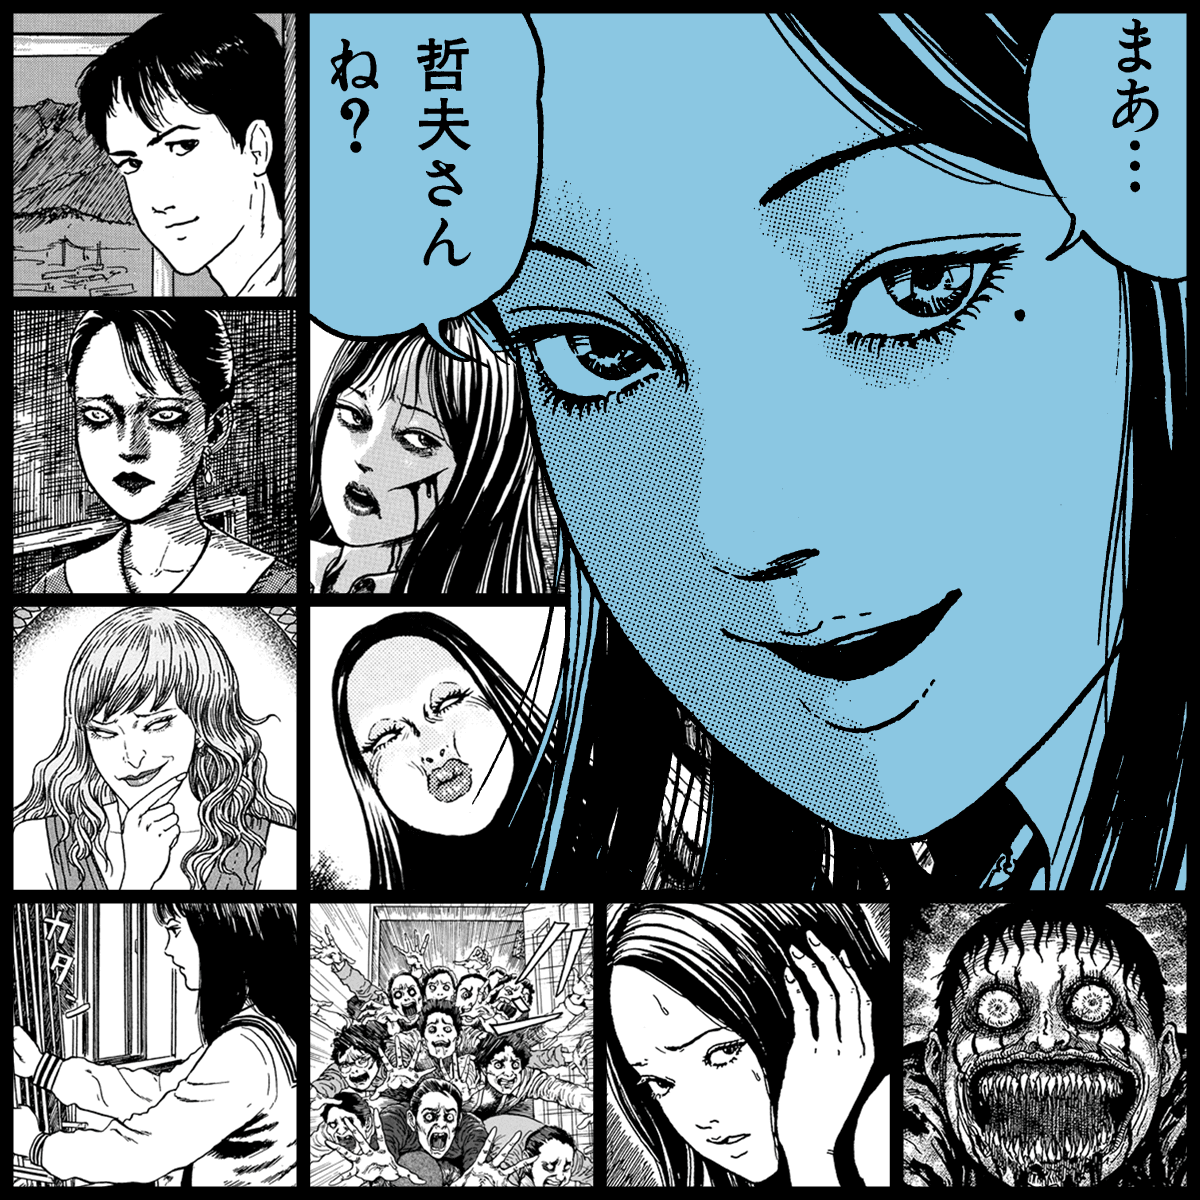 TOMIE by Junji Ito #1182